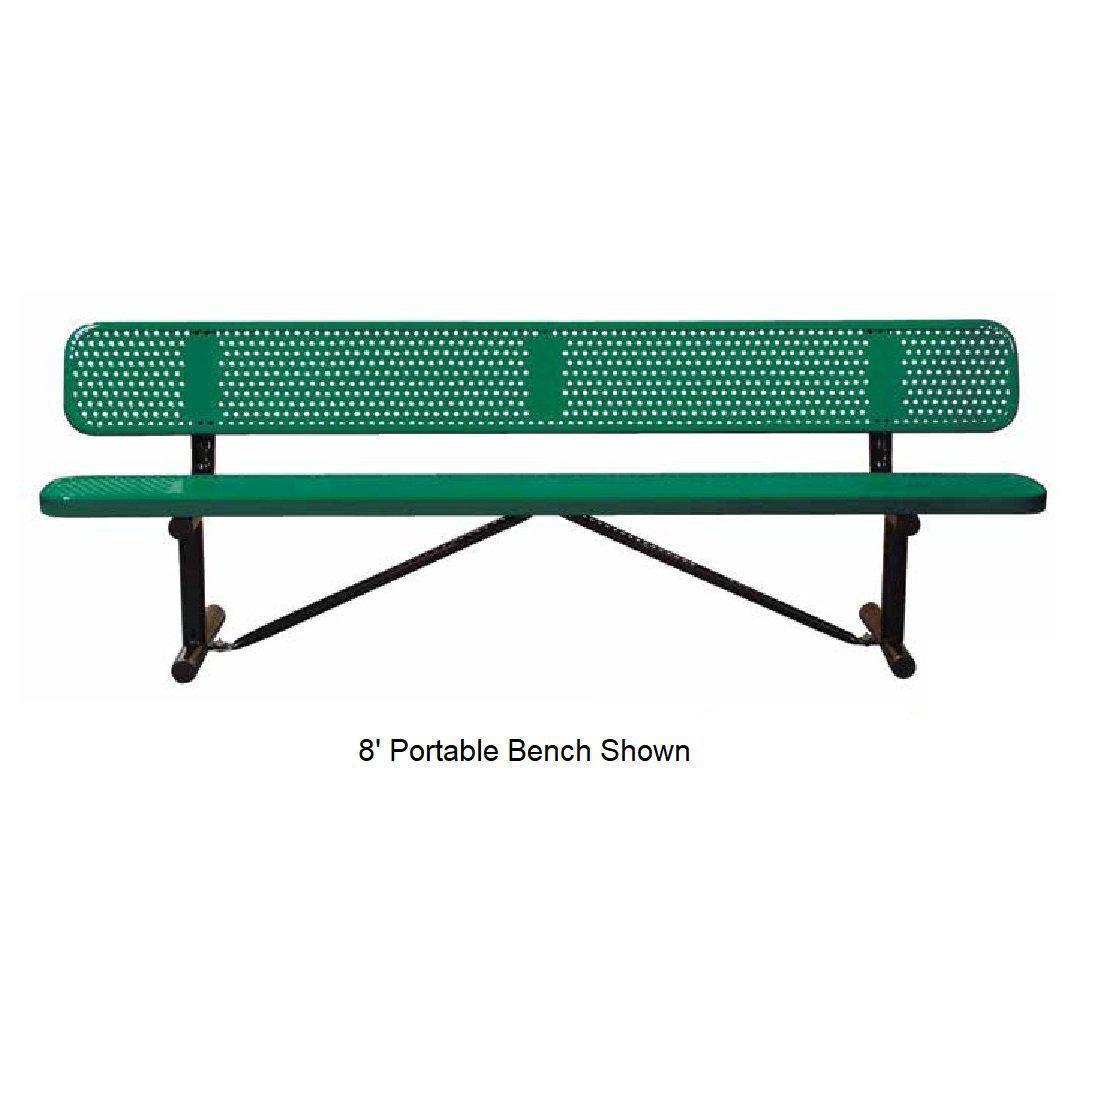 4’ Standard Perforated Bench With Back, Portable